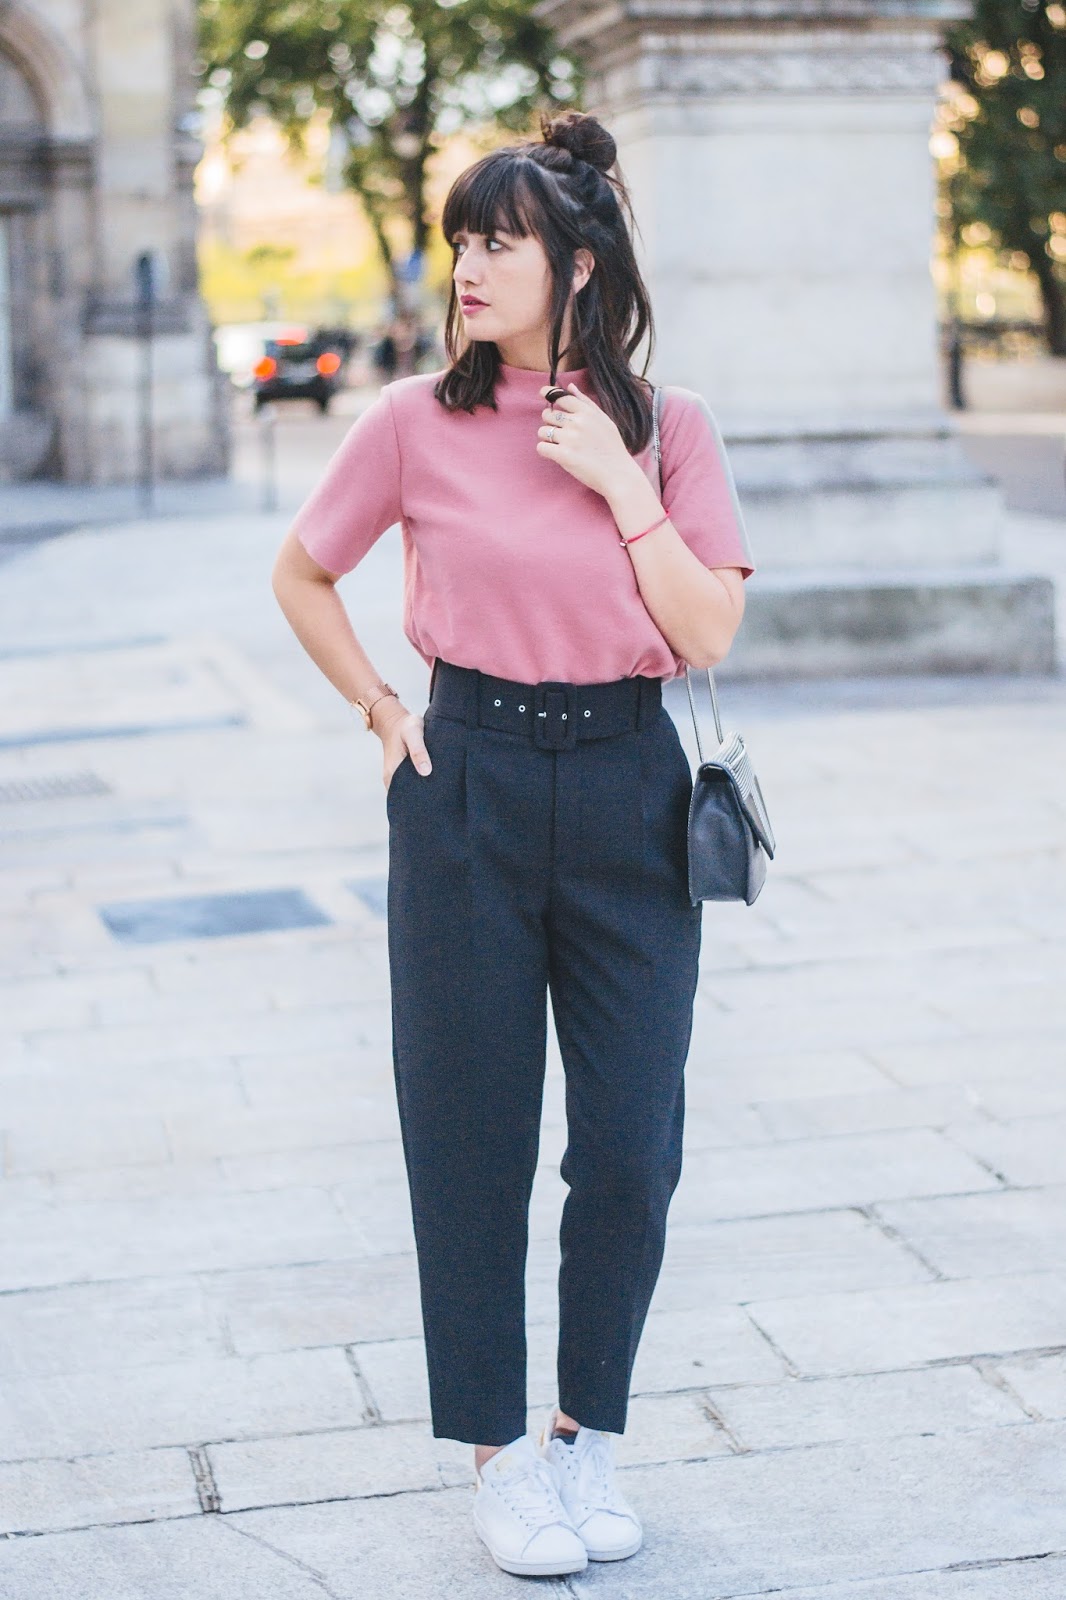 meetmeinparee-style-look-mode-fashion-ootd-streetstyle-cool-autumnstyling